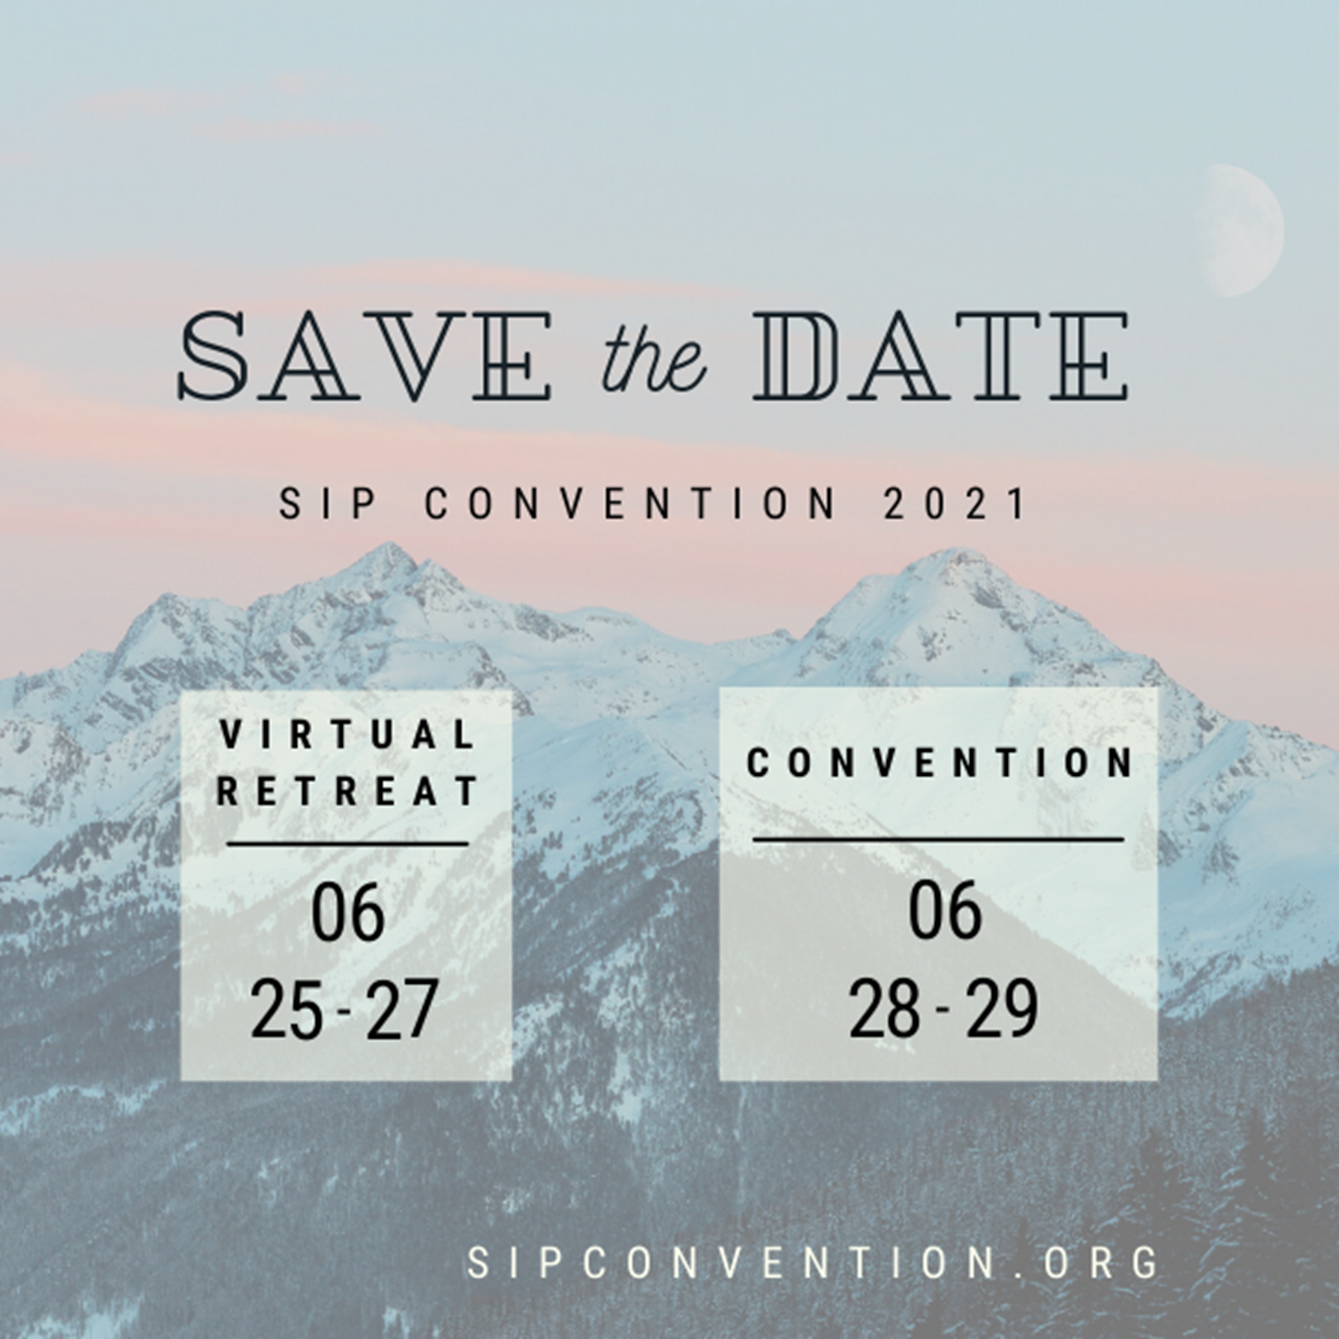 Save the Date. SIP Convention 2021. Virtual Retreat will be June 25-27, 2021. Virtual Connvention will be June 28-29, 2021.